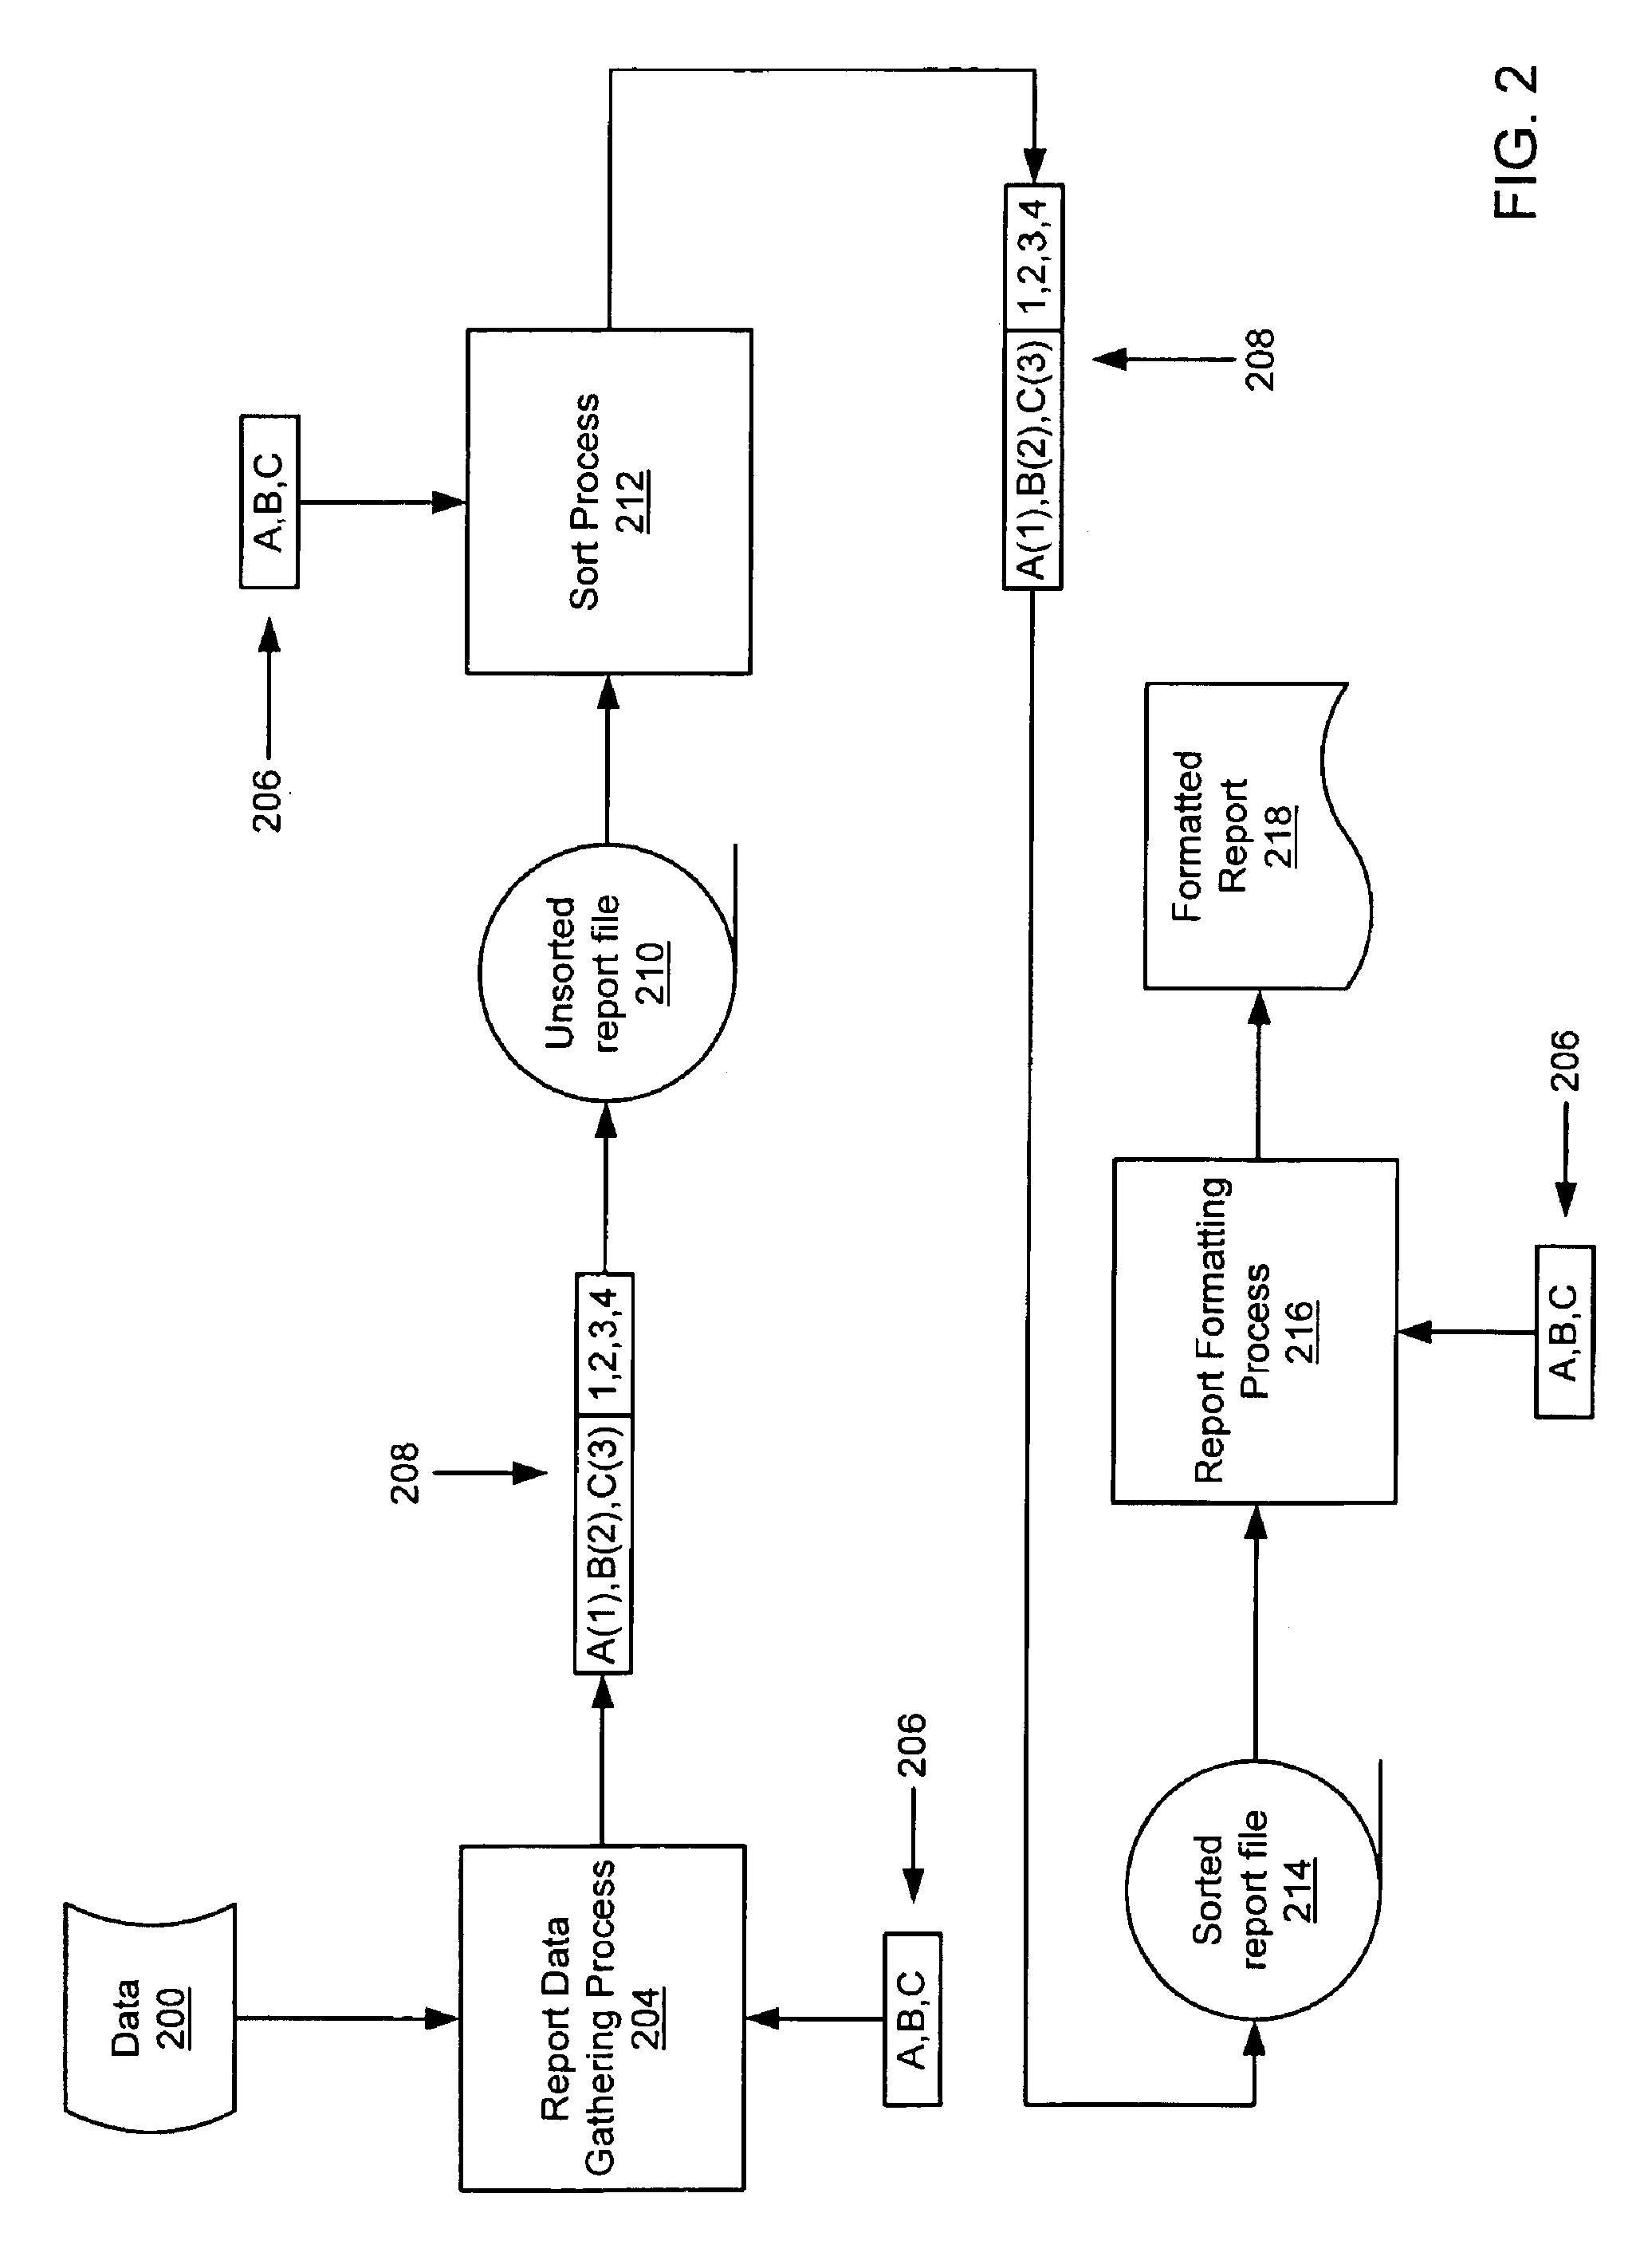 Configuring systems for generating business transaction reports using processing relationships among entities of an organization